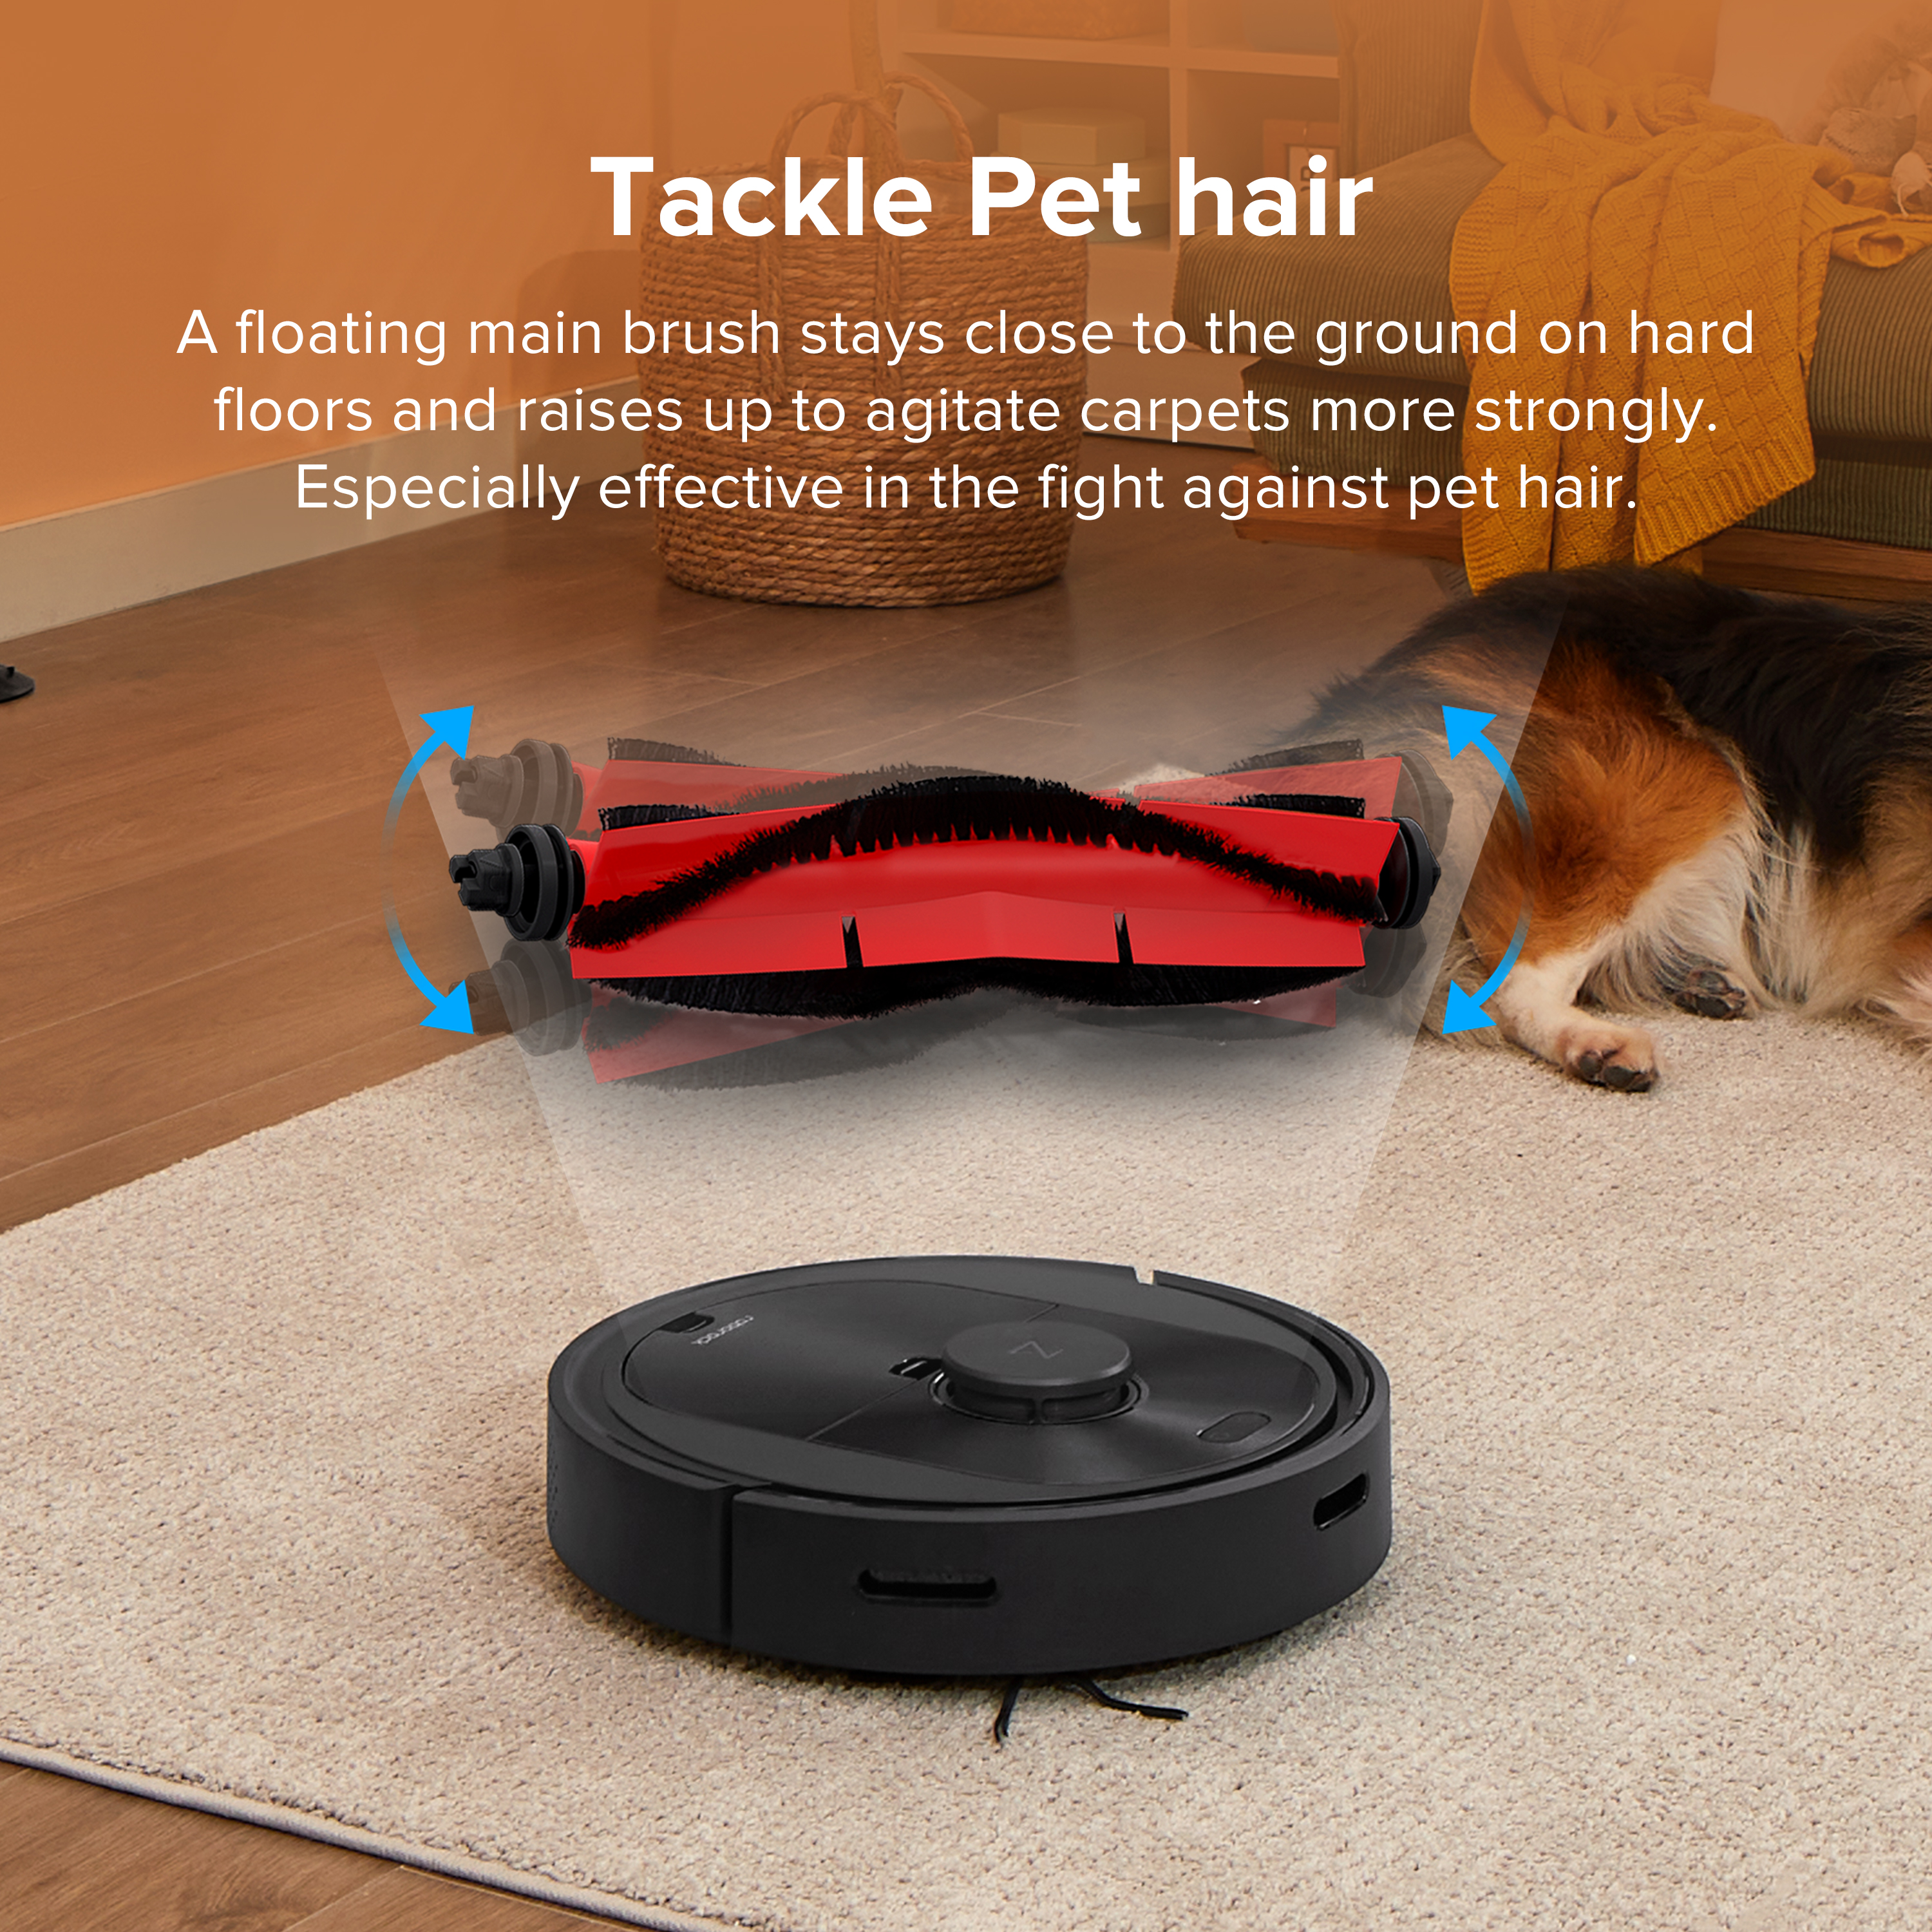 Roborock® Q5+ Auto Emptying Robot Vacuum Cleaner, 2700 Pa Suction Power, with App Control - image 12 of 15